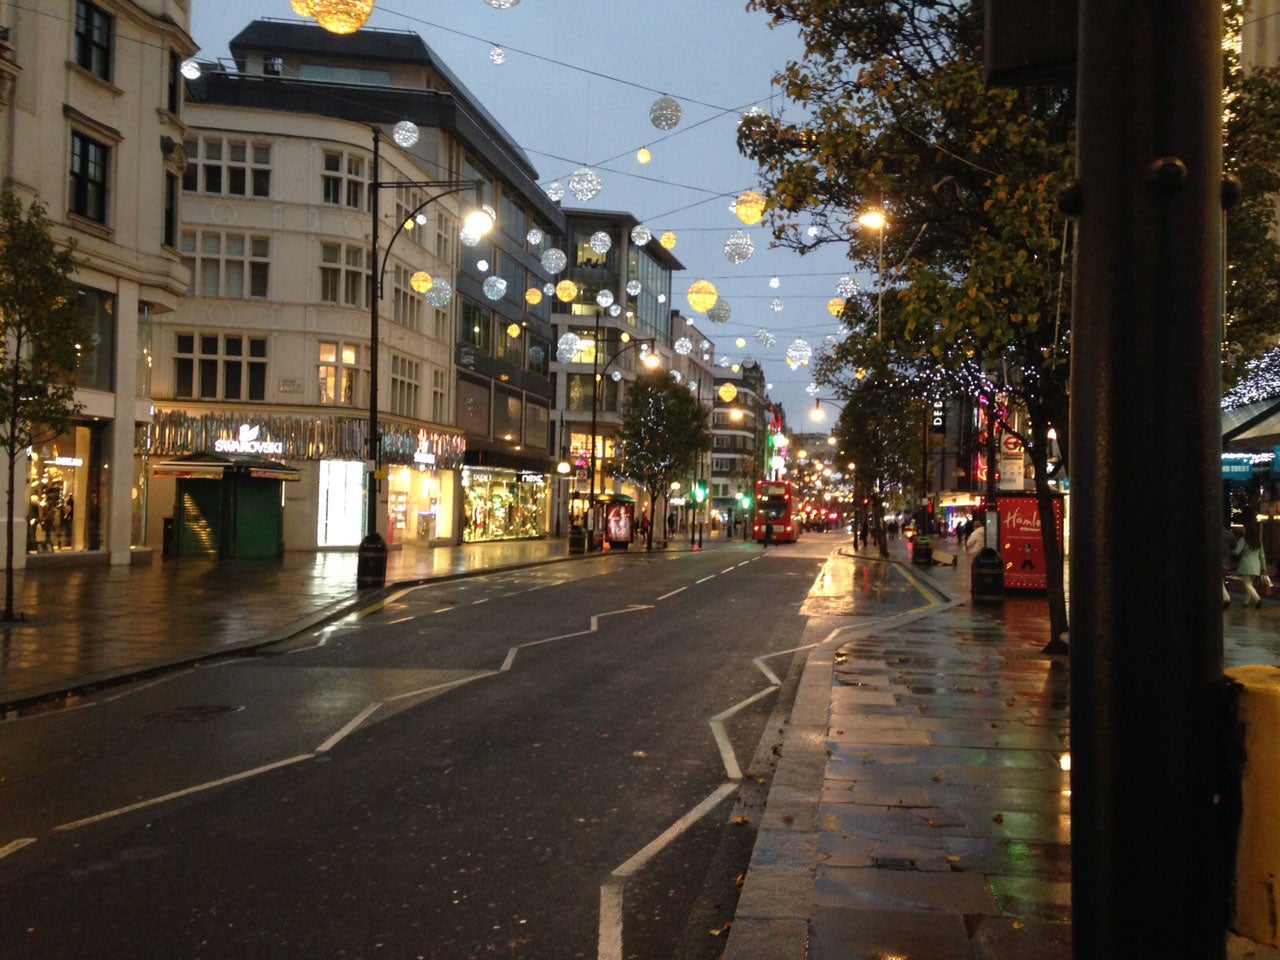 Oxford Circus on Black Friday morning